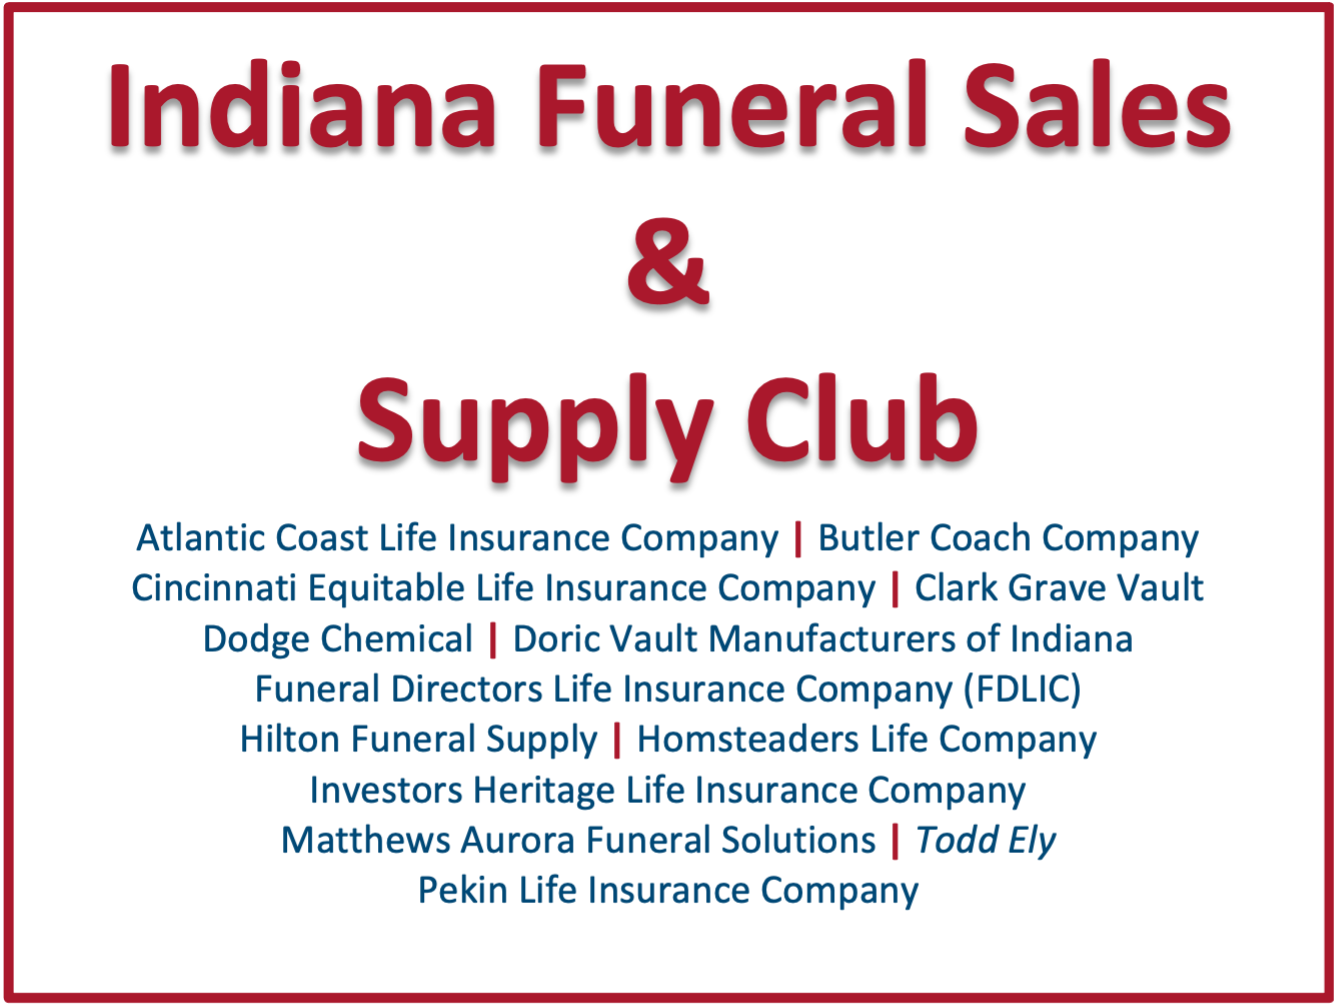 Indiana Funeral Sales & Supply Club 